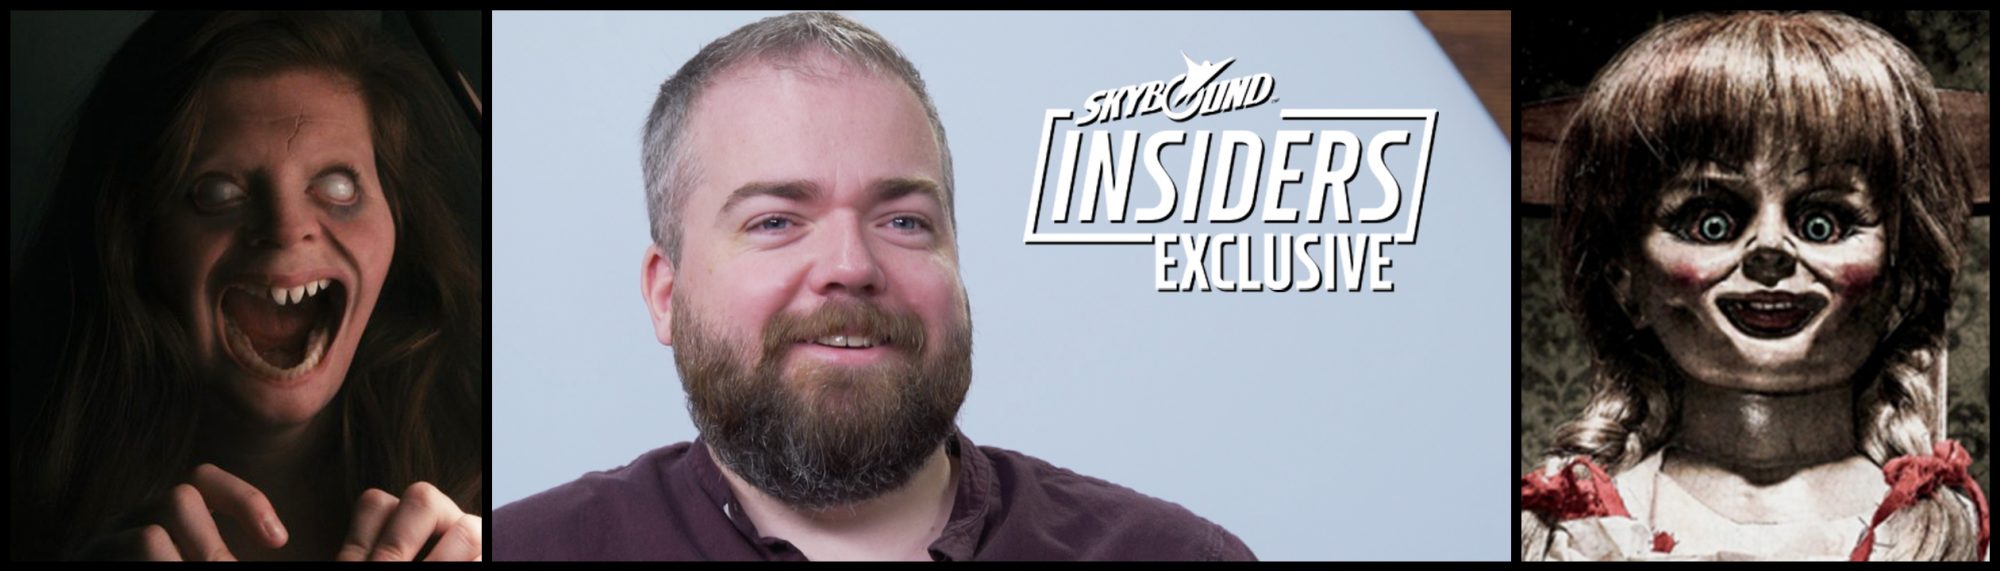 David F. Sandberg’s introduction to the entertainment industry has been anything but conventional. With his new film, Annabelle: Creation recently dropping into theaters, resident Skybound producer and genre fanatic Ian Start sat down with David to talk about how he got his start, hidden scares in his films, and where he is heading.